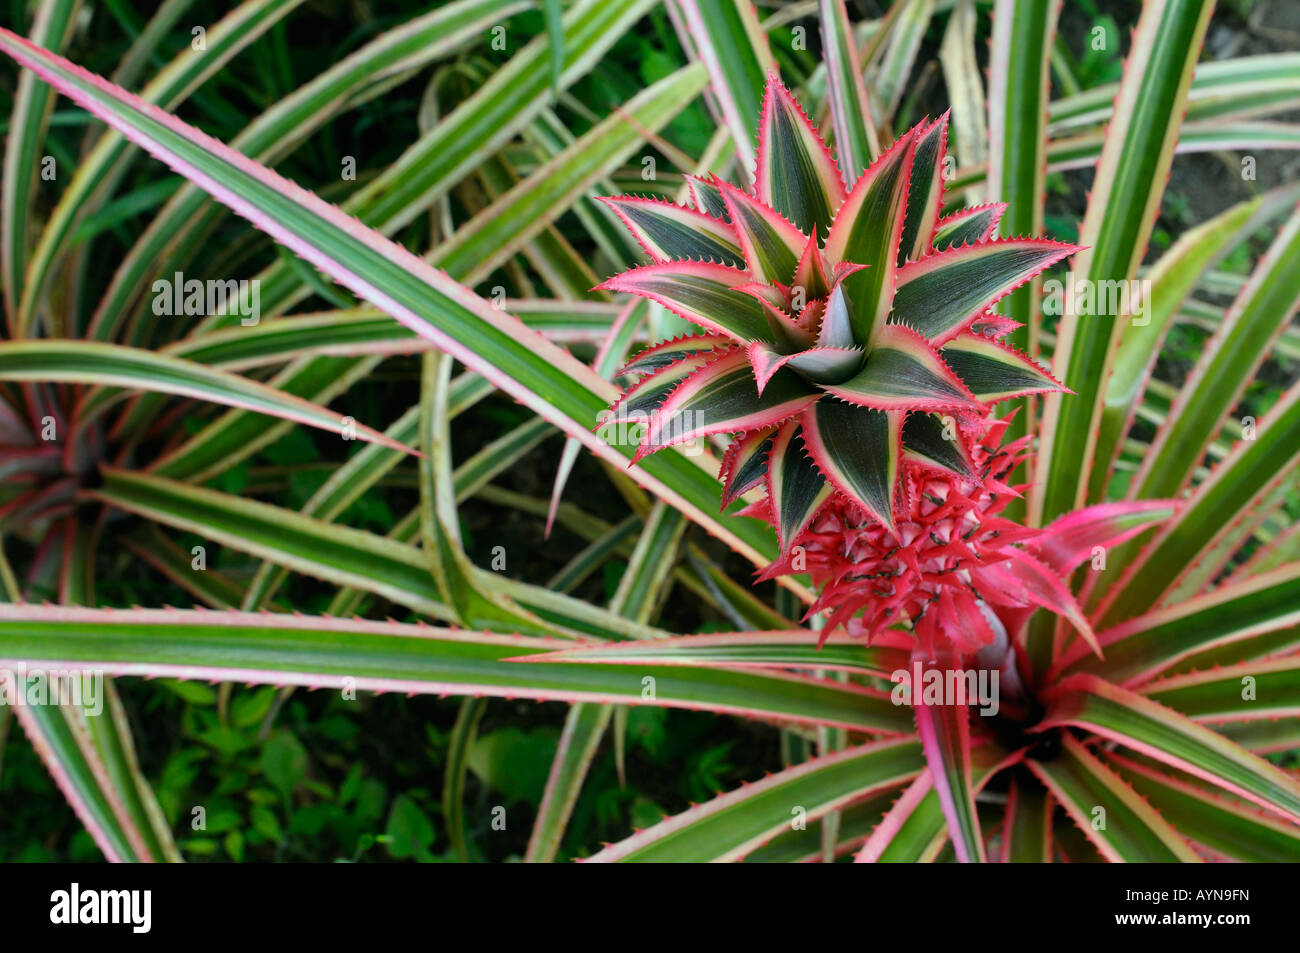 Terminal tuft and swirl of spikey leaves on a Red Ornamental variegated Pineapple Ananas bracteatus Striatus Costa Rica Stock Photo